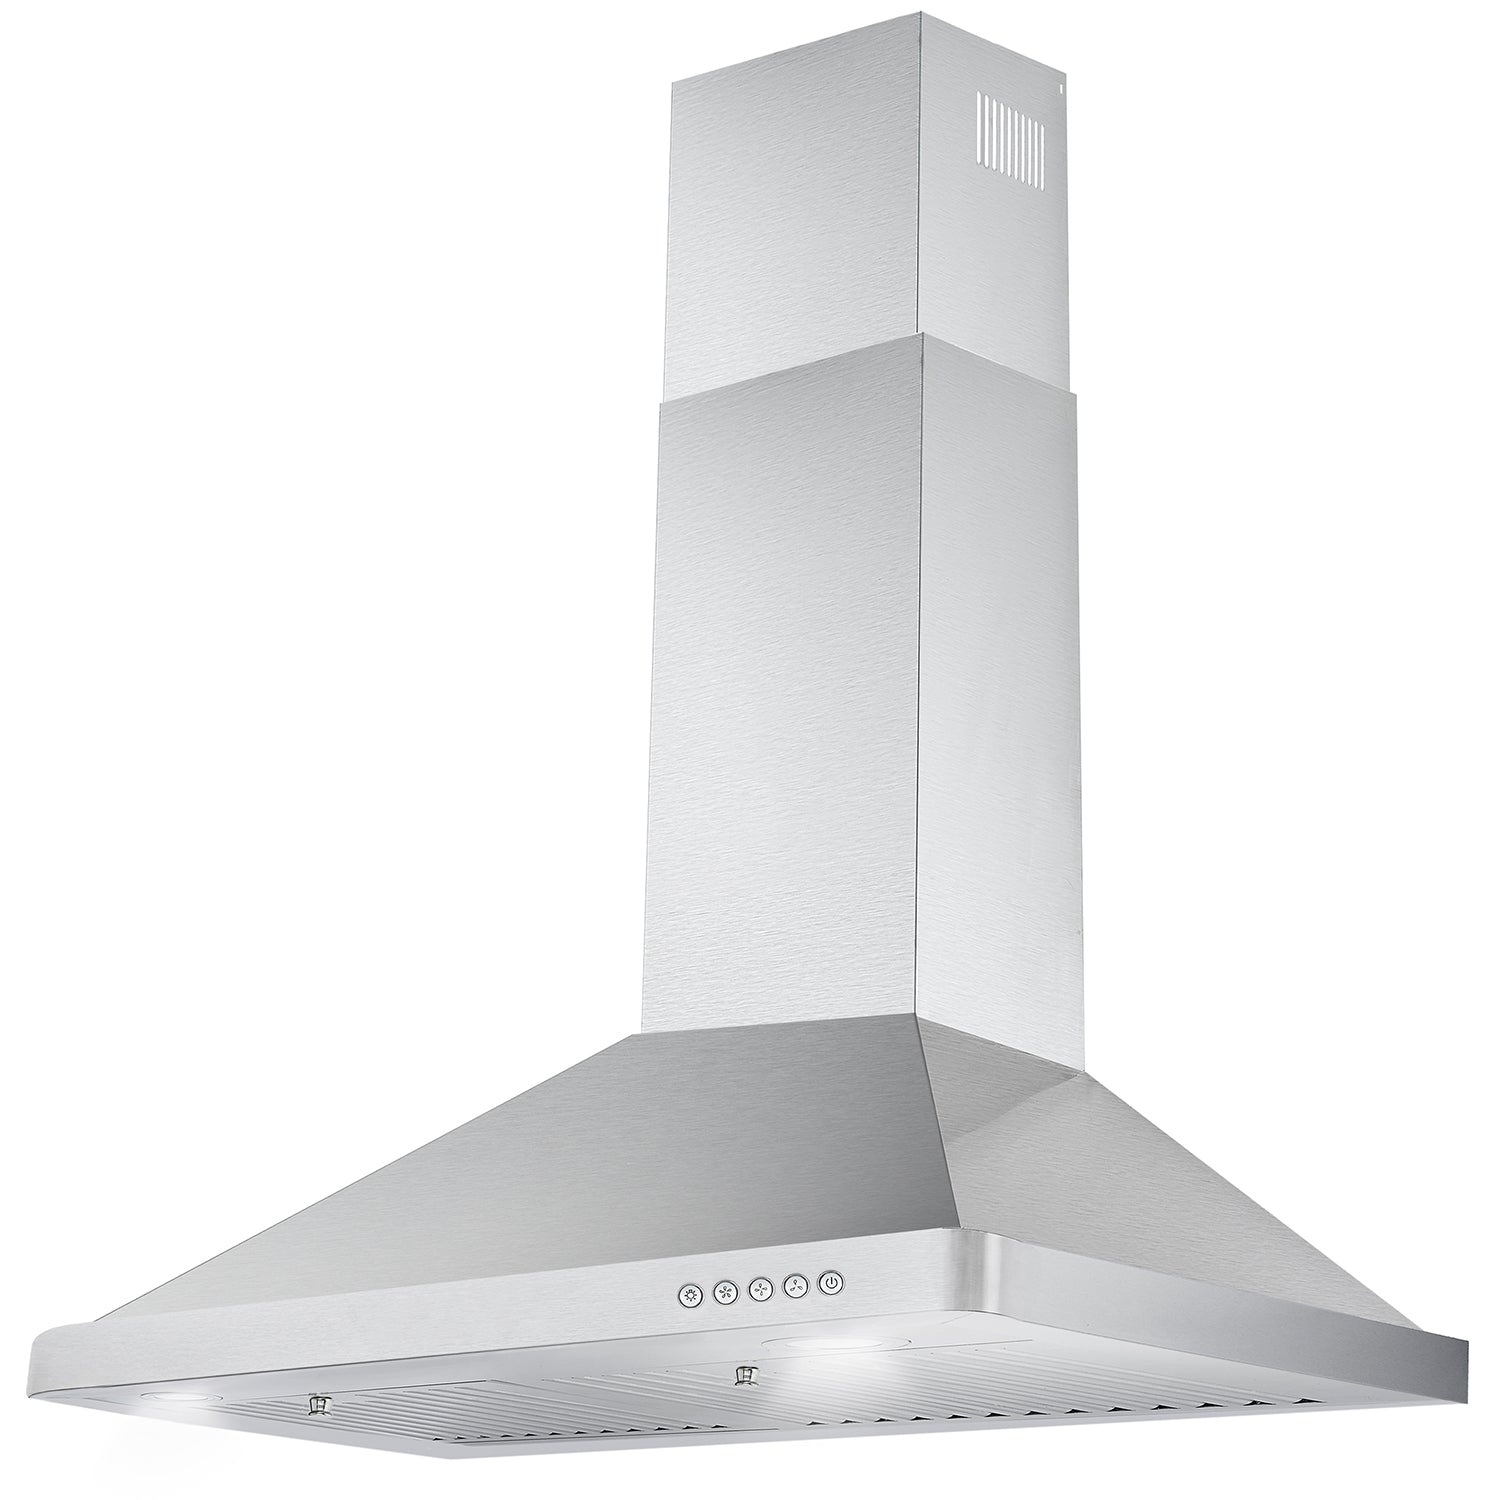 Cosmo 30" Ductless Wall Mount Range Hood with Push Button Controls, 3-Speed Fan, Permanent Filters, LED Lights & Carbon Filter Kit - COS-63175-DL